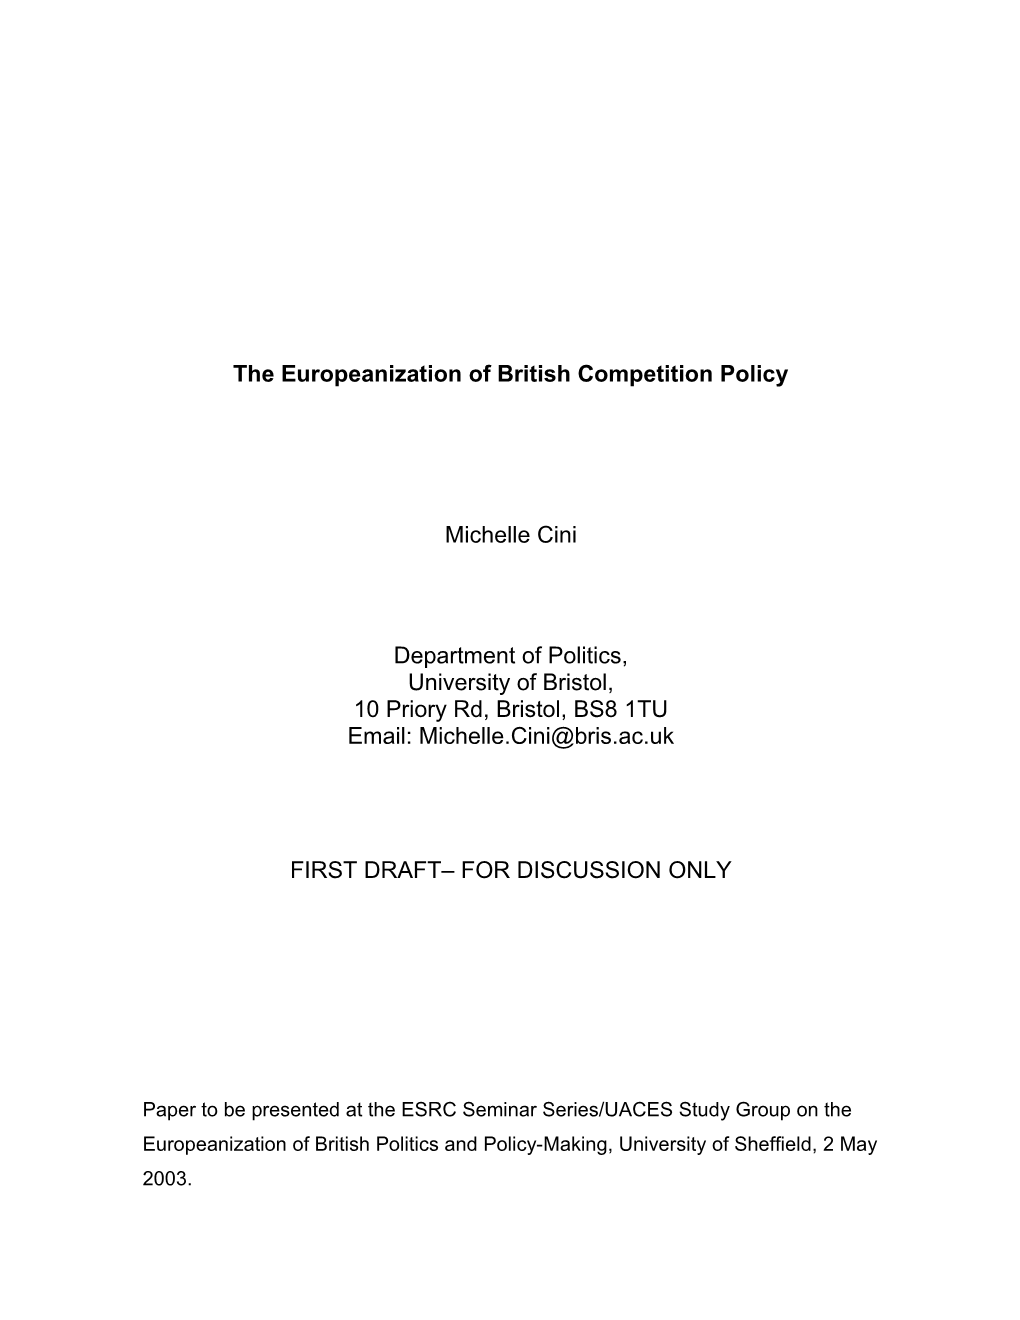 The Europeanisation of British Competition Policy